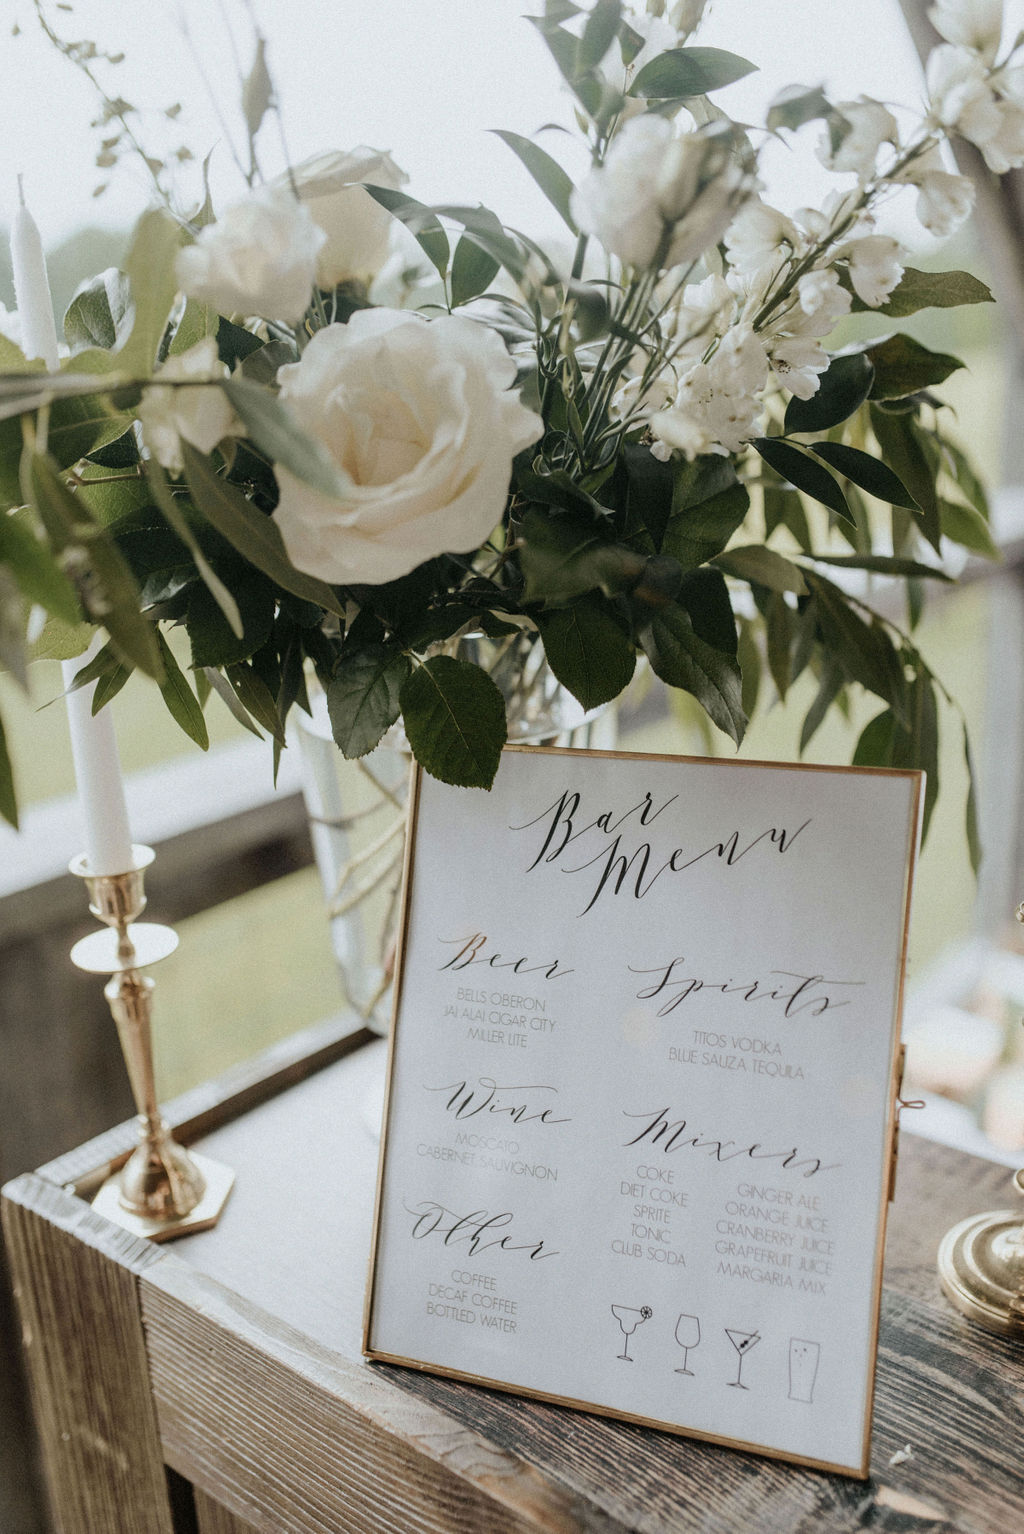 A bar menu with white flowers and greenery.